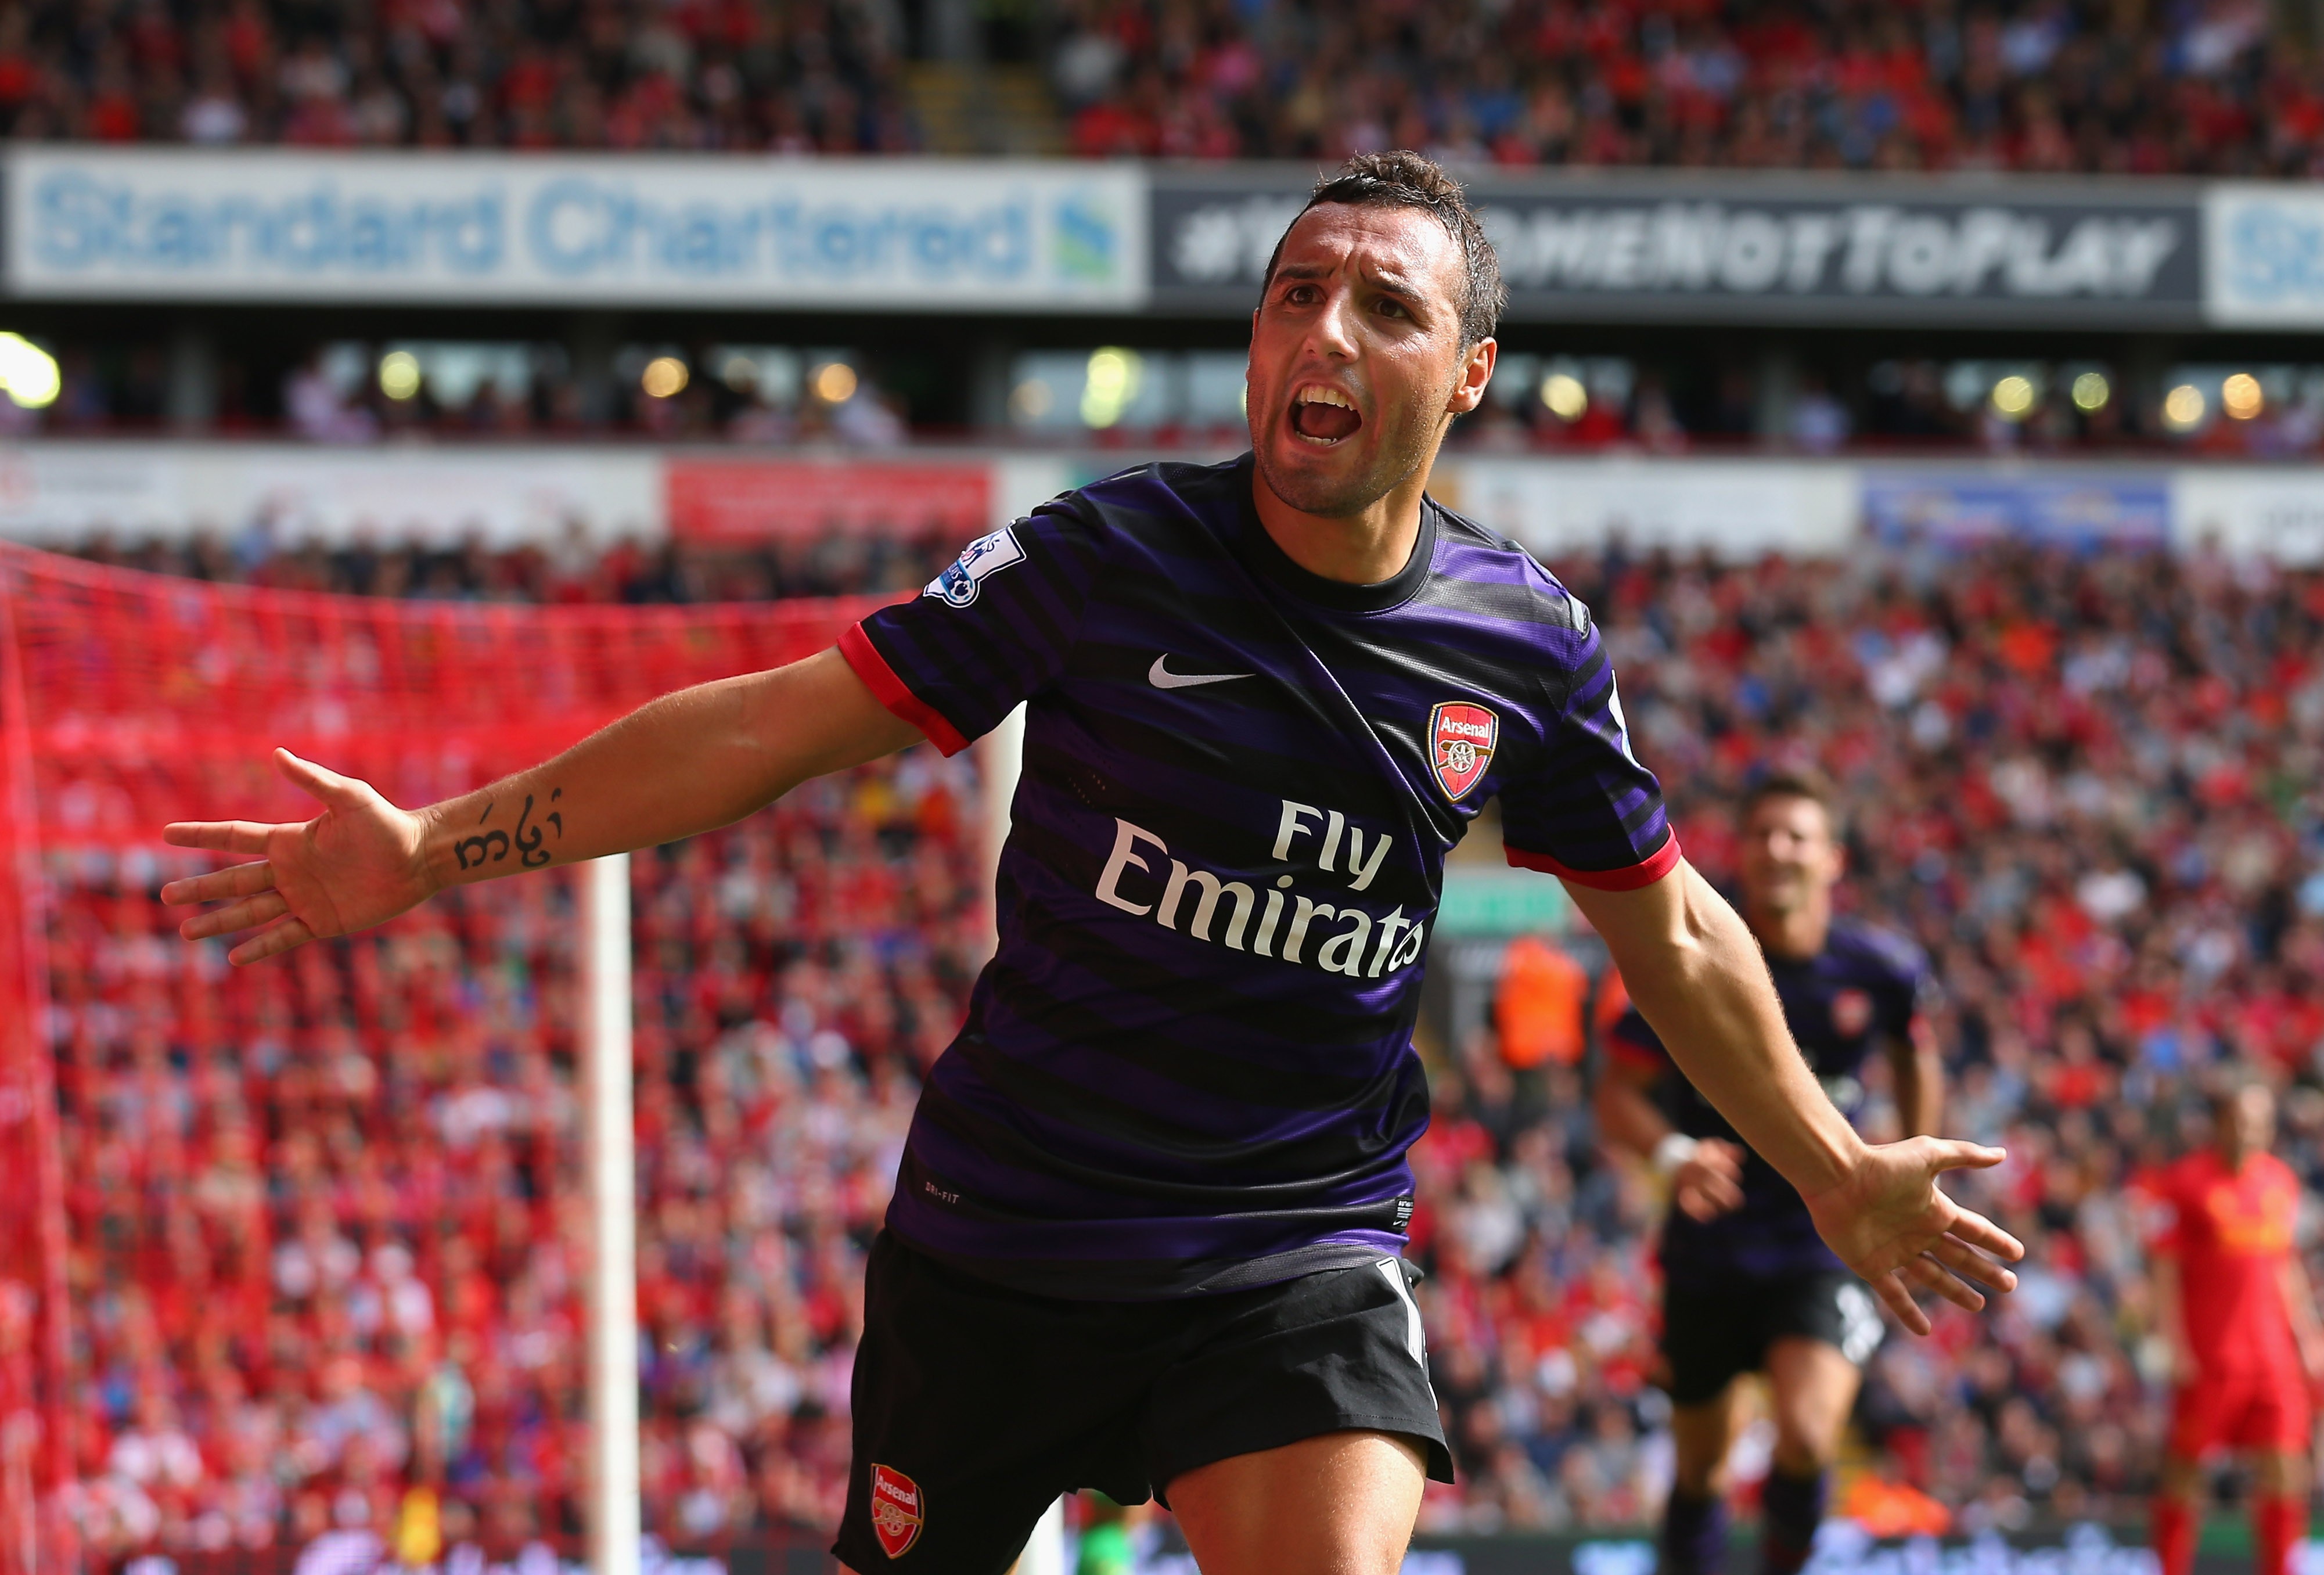 LIVERPOOL, ENGLAND - SEPTEMBER 02: Santi Cazorla of Arsenal celebrates after scoring the second goal during the Barclays Premier League match between Liverpool and Arsenal at Anfield on September 2, 2012 in Liverpool, England. (Photo by Alex Livesey/Getty Images)